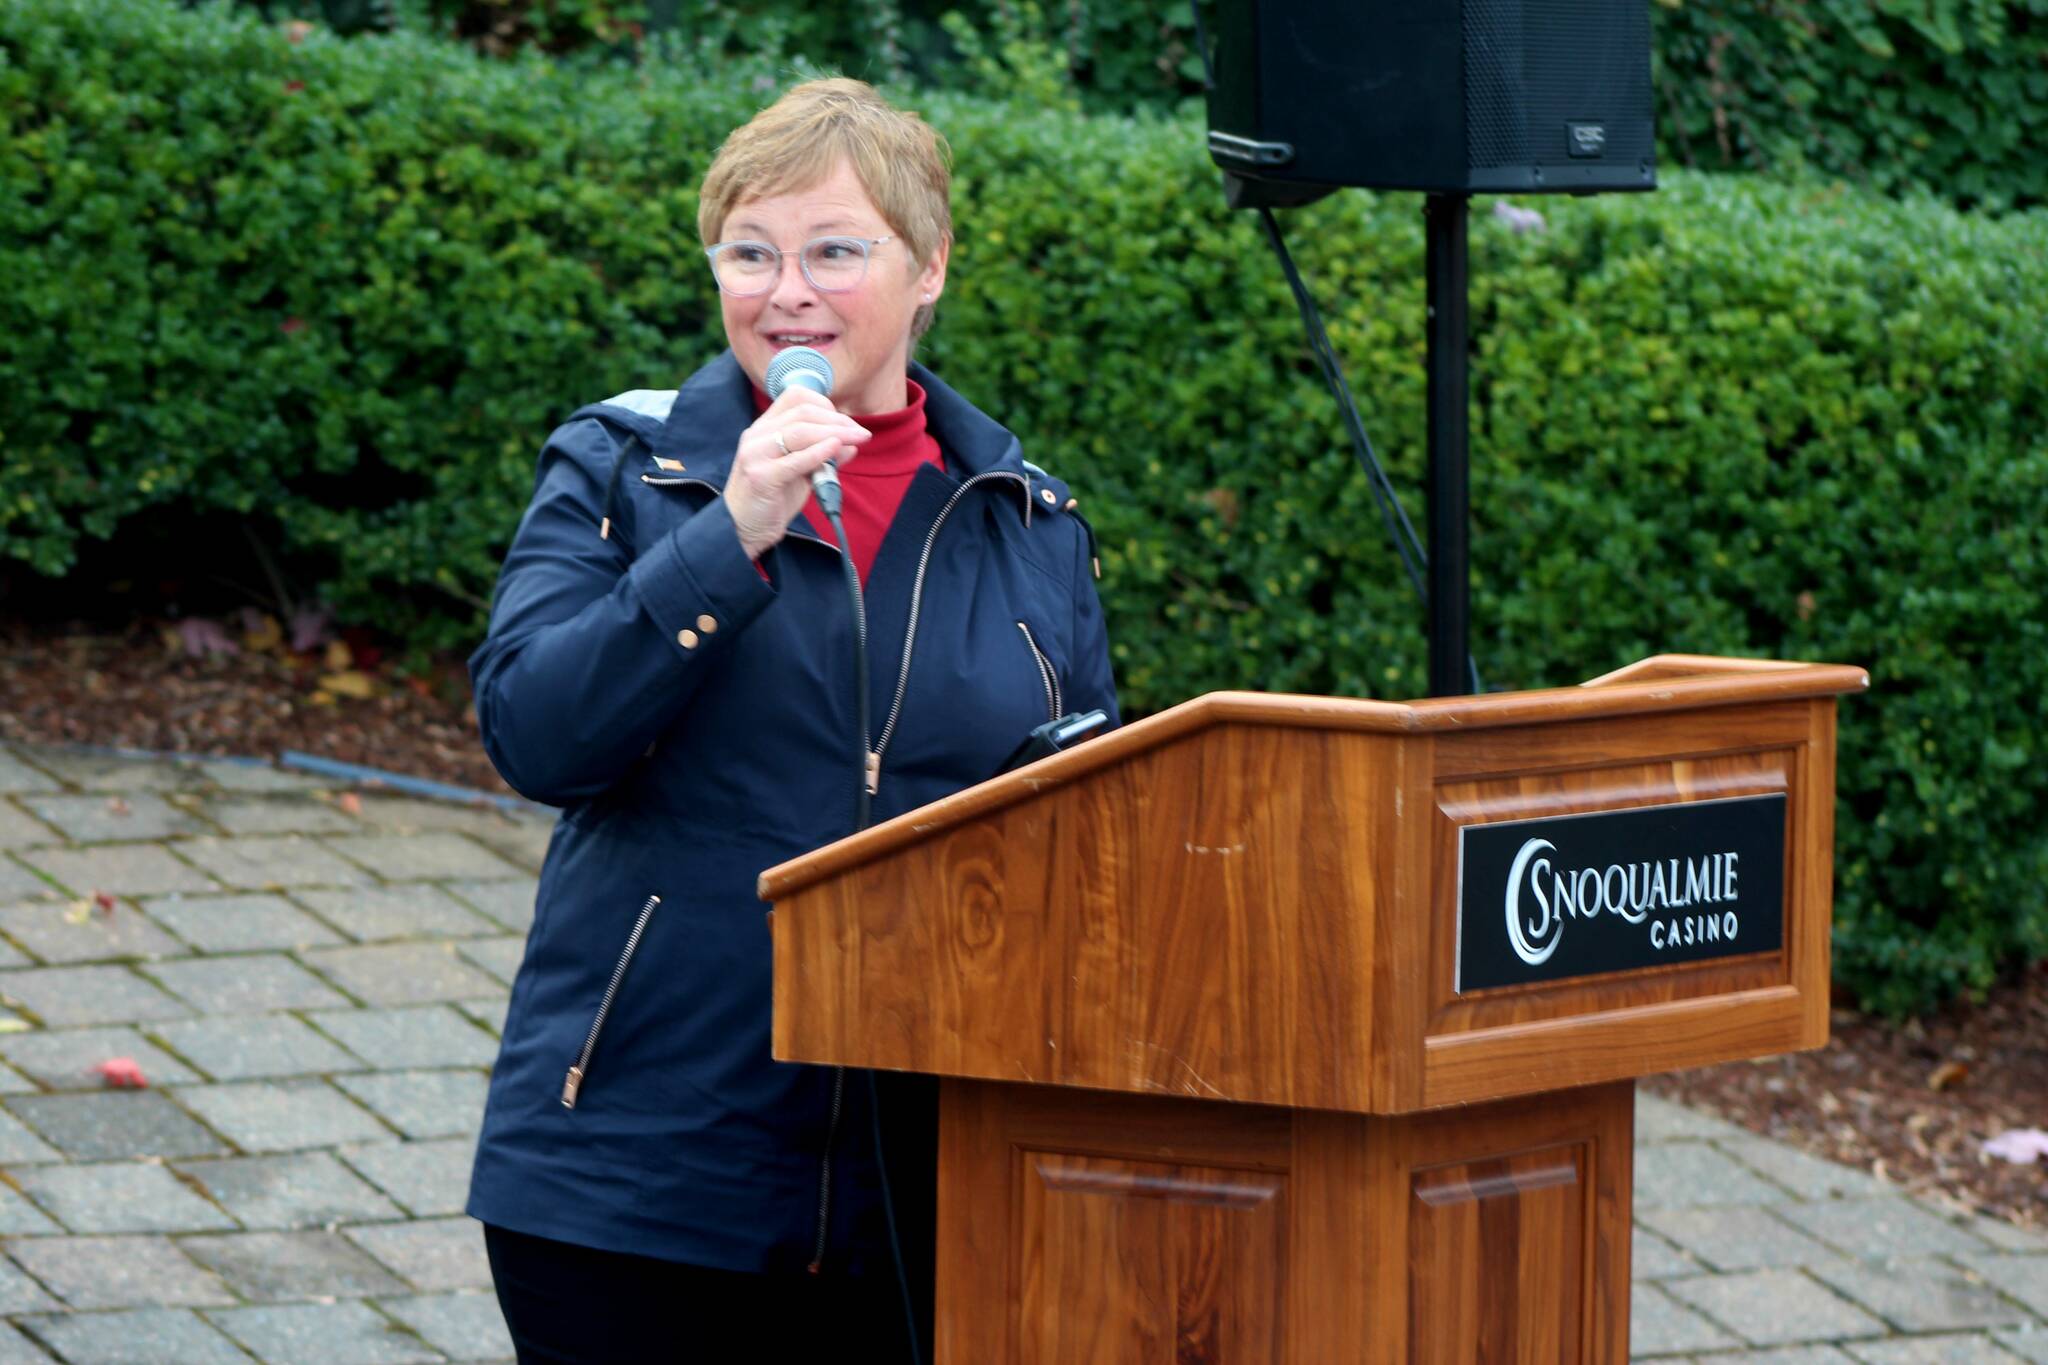 King County Councilmember Sarah Perry speaks at the Snoqualmie Casino. File photo Conor Wilson/Valley Record